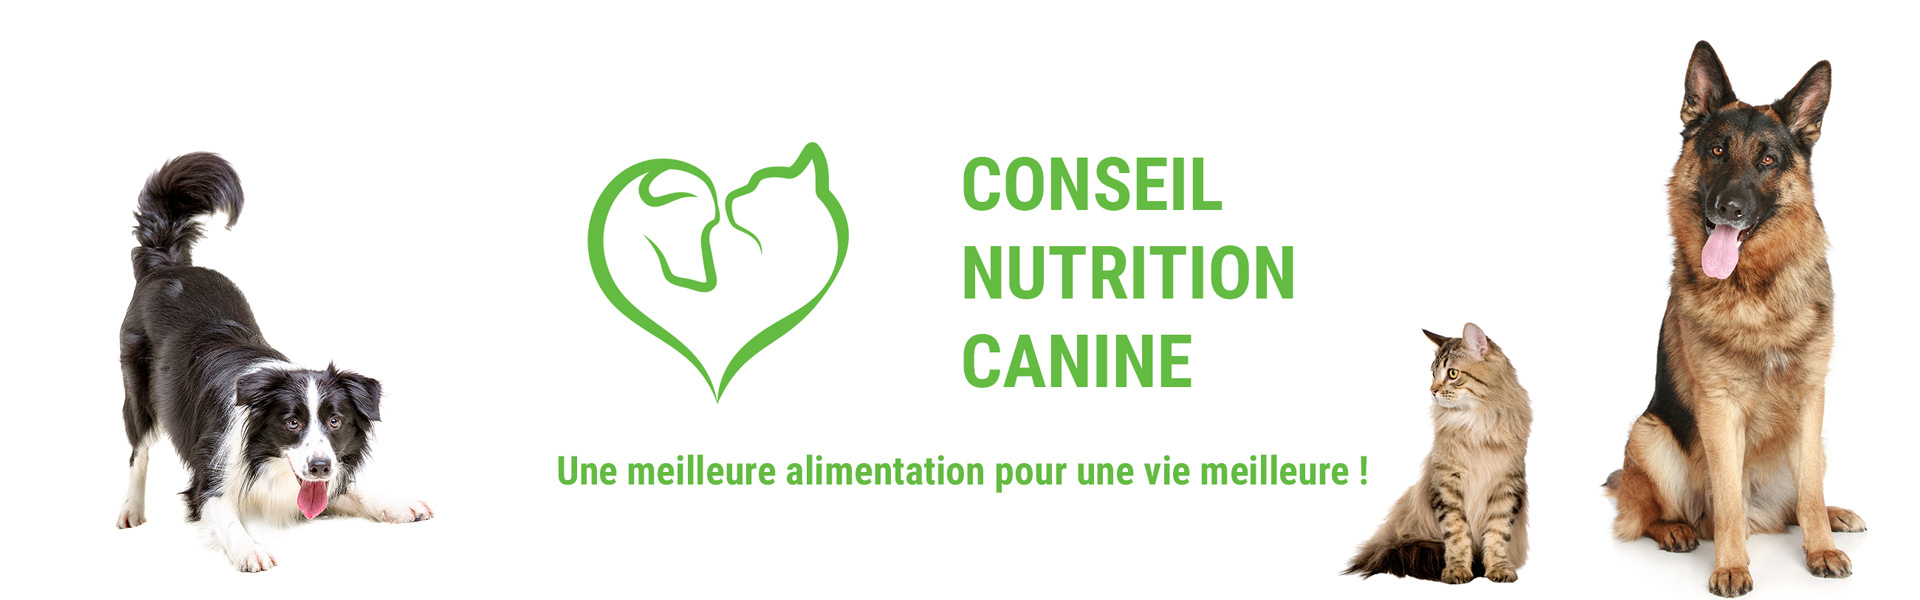 Projet nutrition canine